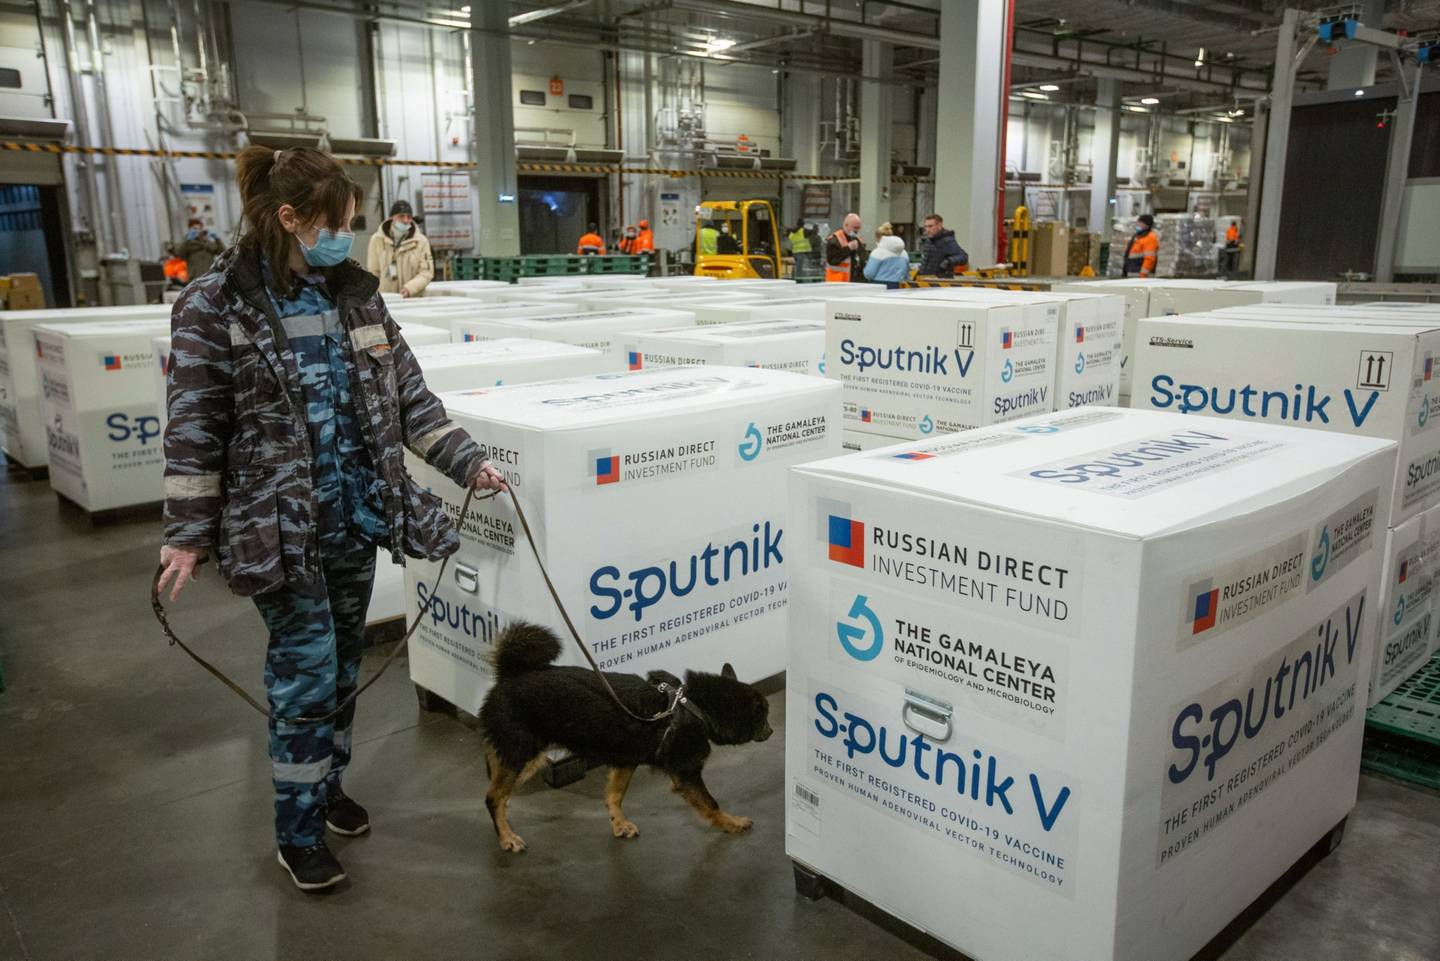 An employee handles a sniffer dog during a check on boxes of the Sputnik V COVID-19 vaccine, developed by the Gamaleya National Research Center for Epidemiology and Microbiology and the Russian Direct Investment Fund (RDIF), at the cargo terminal at Sheremetyevo International Airport OAO in Moscow, Russia, on Thursday, Feb. 11, 2021. Montenegro and St. Vincent and the Grenadines approved Russian-developed vaccine for use, bringing total number of countries that have authorized it to 26, Russian Direct Investment Fund says in statement. Photographer: Andrey Rudakov/Bloombergdfd